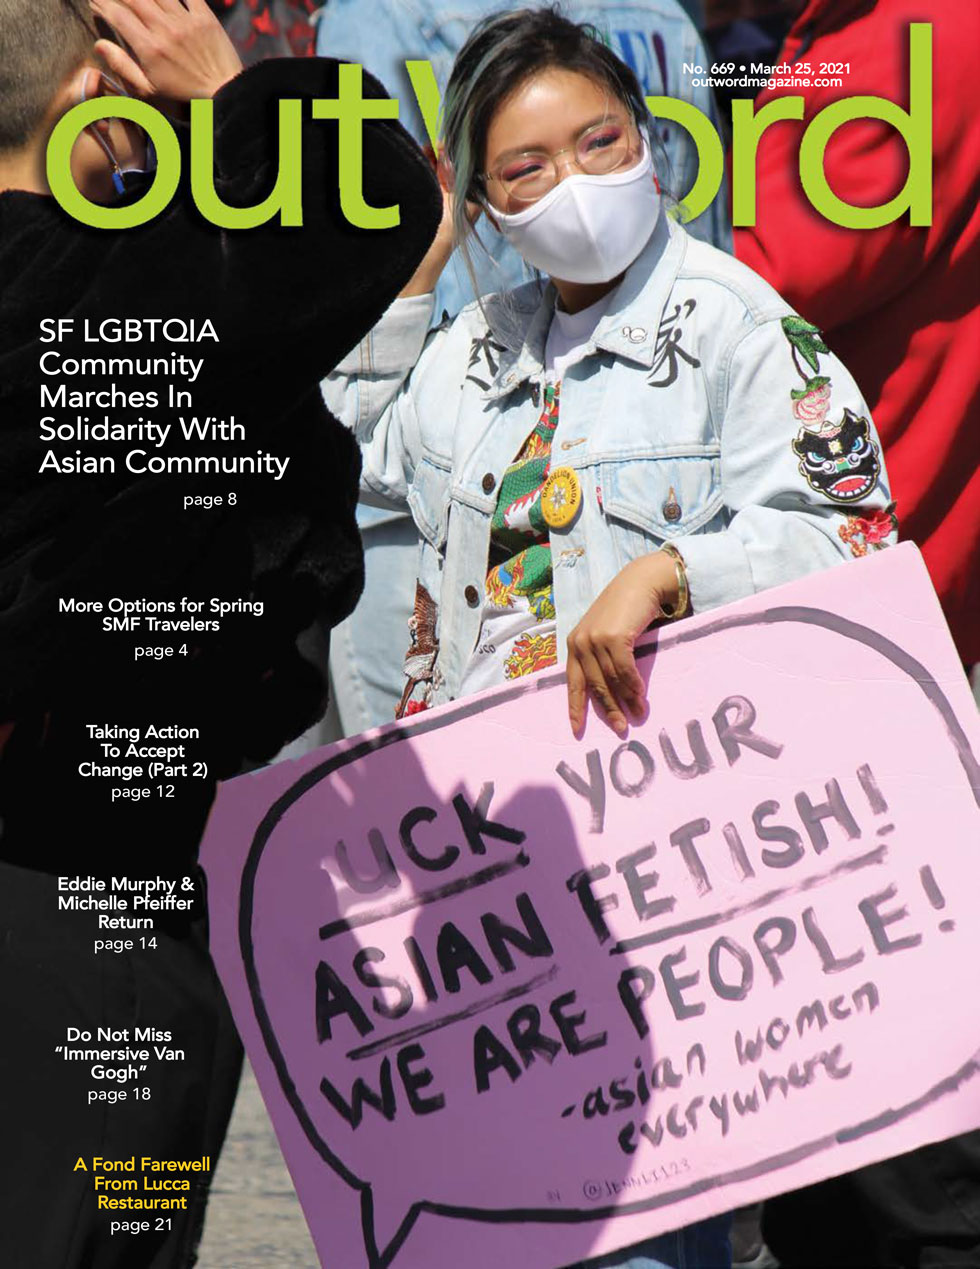 March 25, 2021 | Outword's March 25 Issue is Out Now!